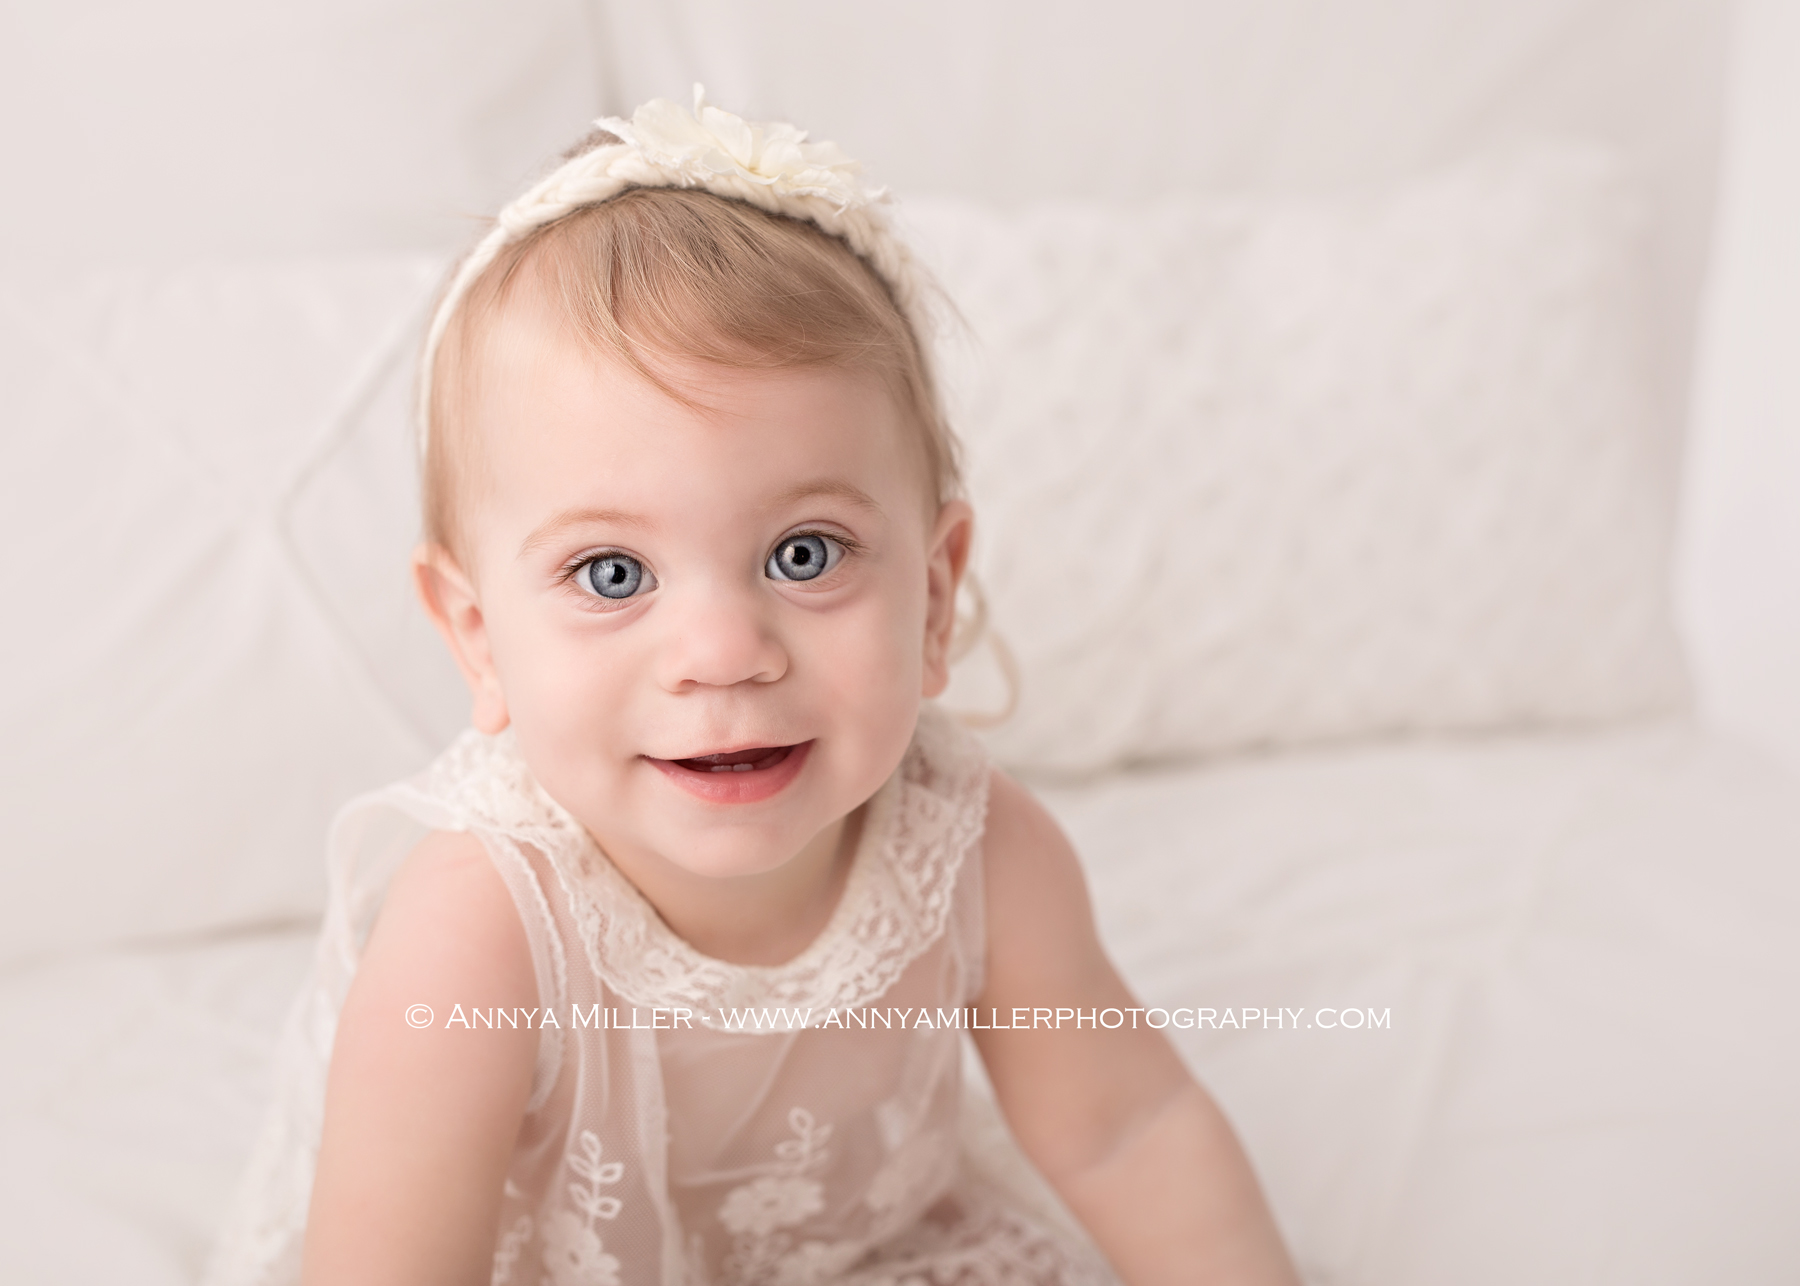 Photograph of baby girl on a white bed by Pickering photographer Annya Miller